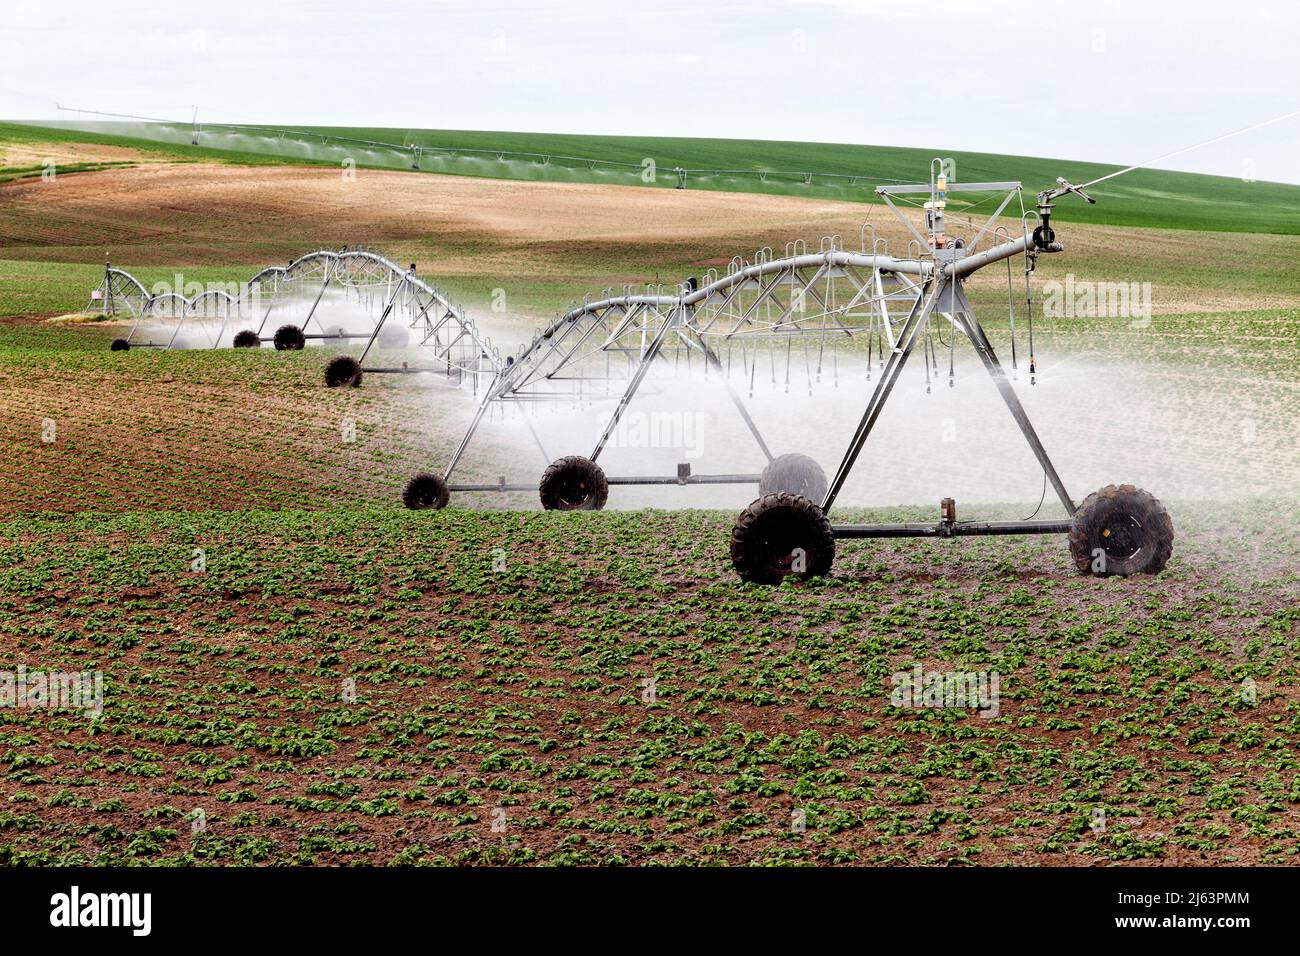 An early morning view of a center pivot sprinkler system in a farm field. Stock Photo